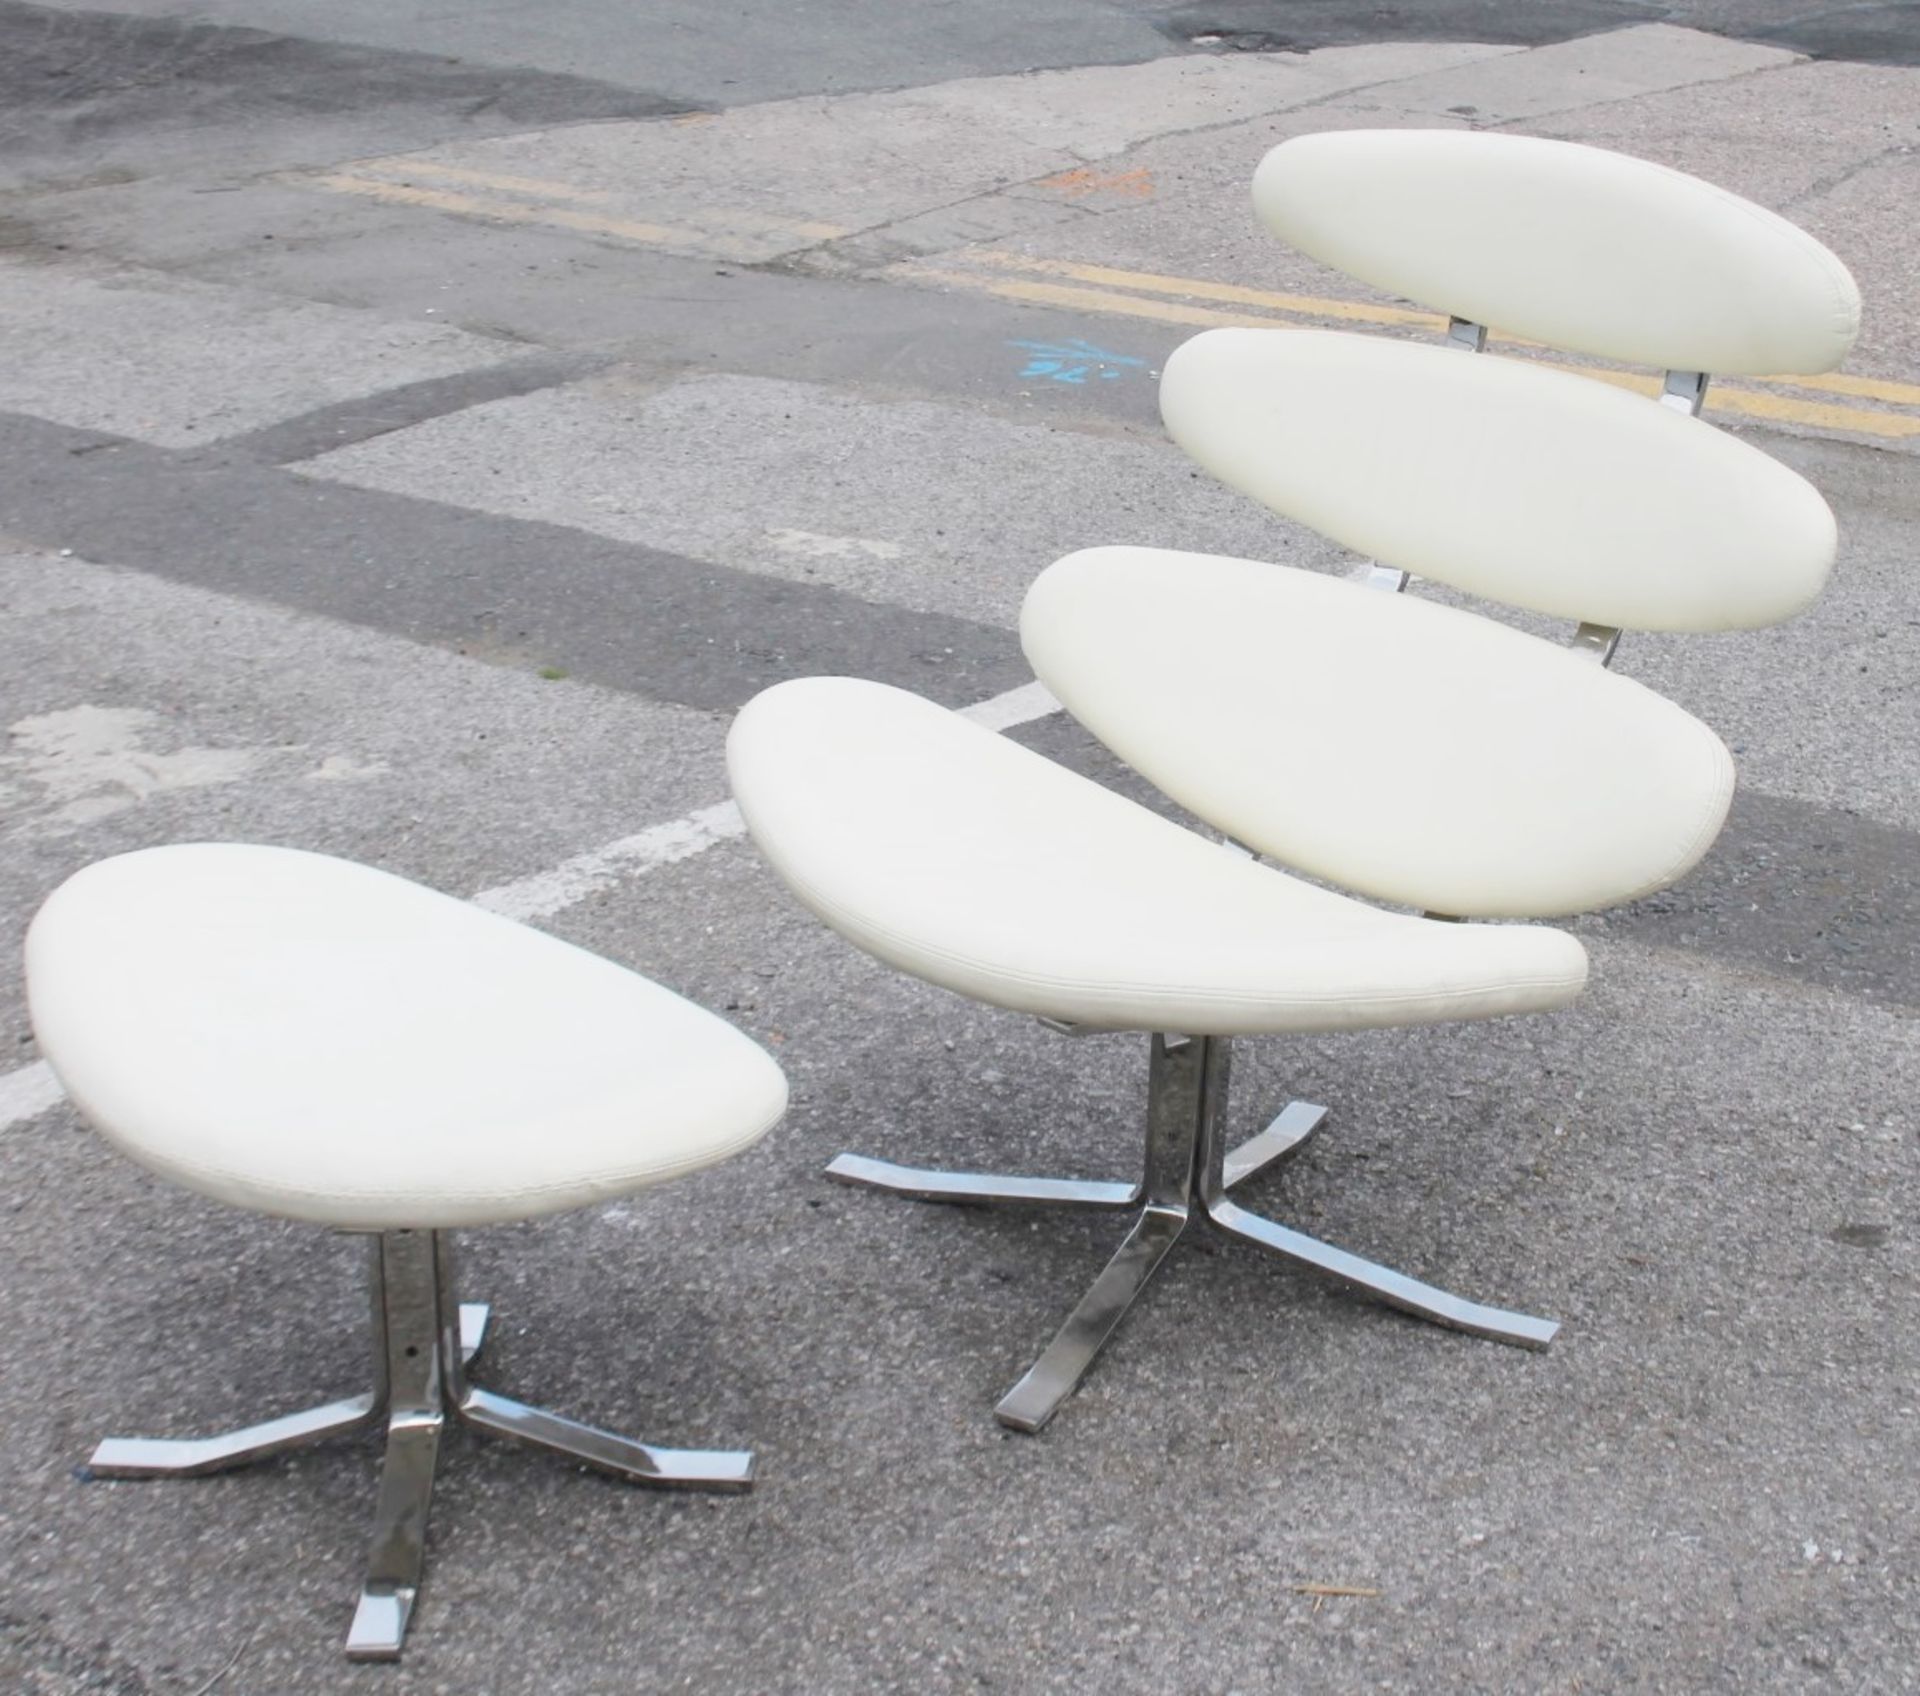 1 x Retro-Inspired Lounge Chair And Stool, Upholstered In A Cream Faux Leather - Ex-display Item